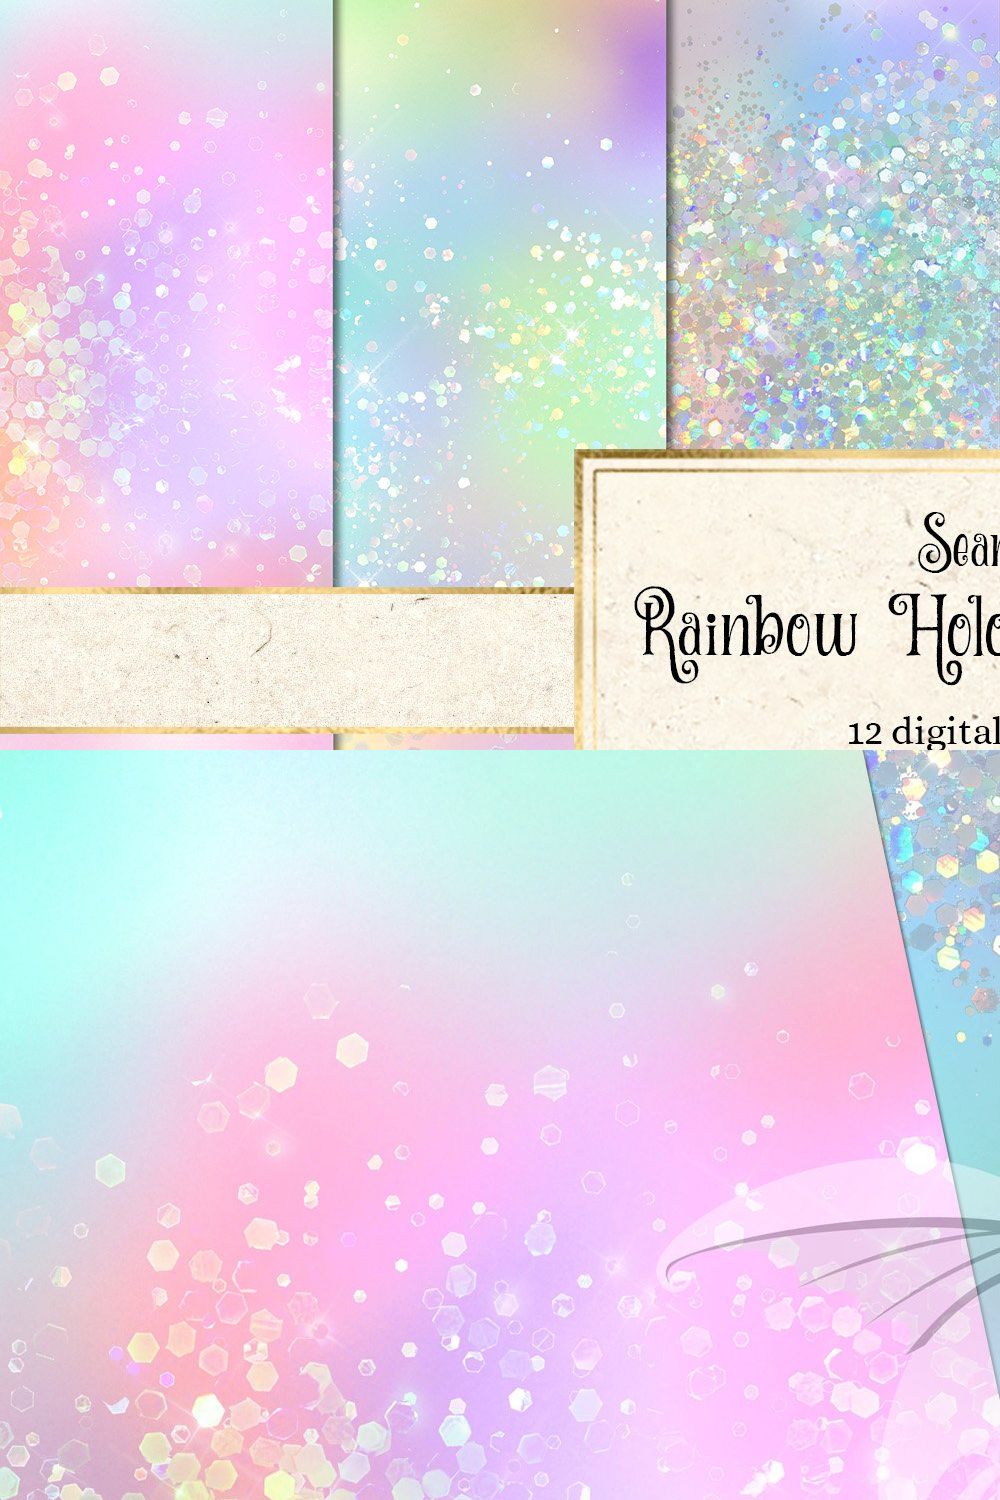 Pastel Holographic Glitter Graphic by Printable Design · Creative Fabrica